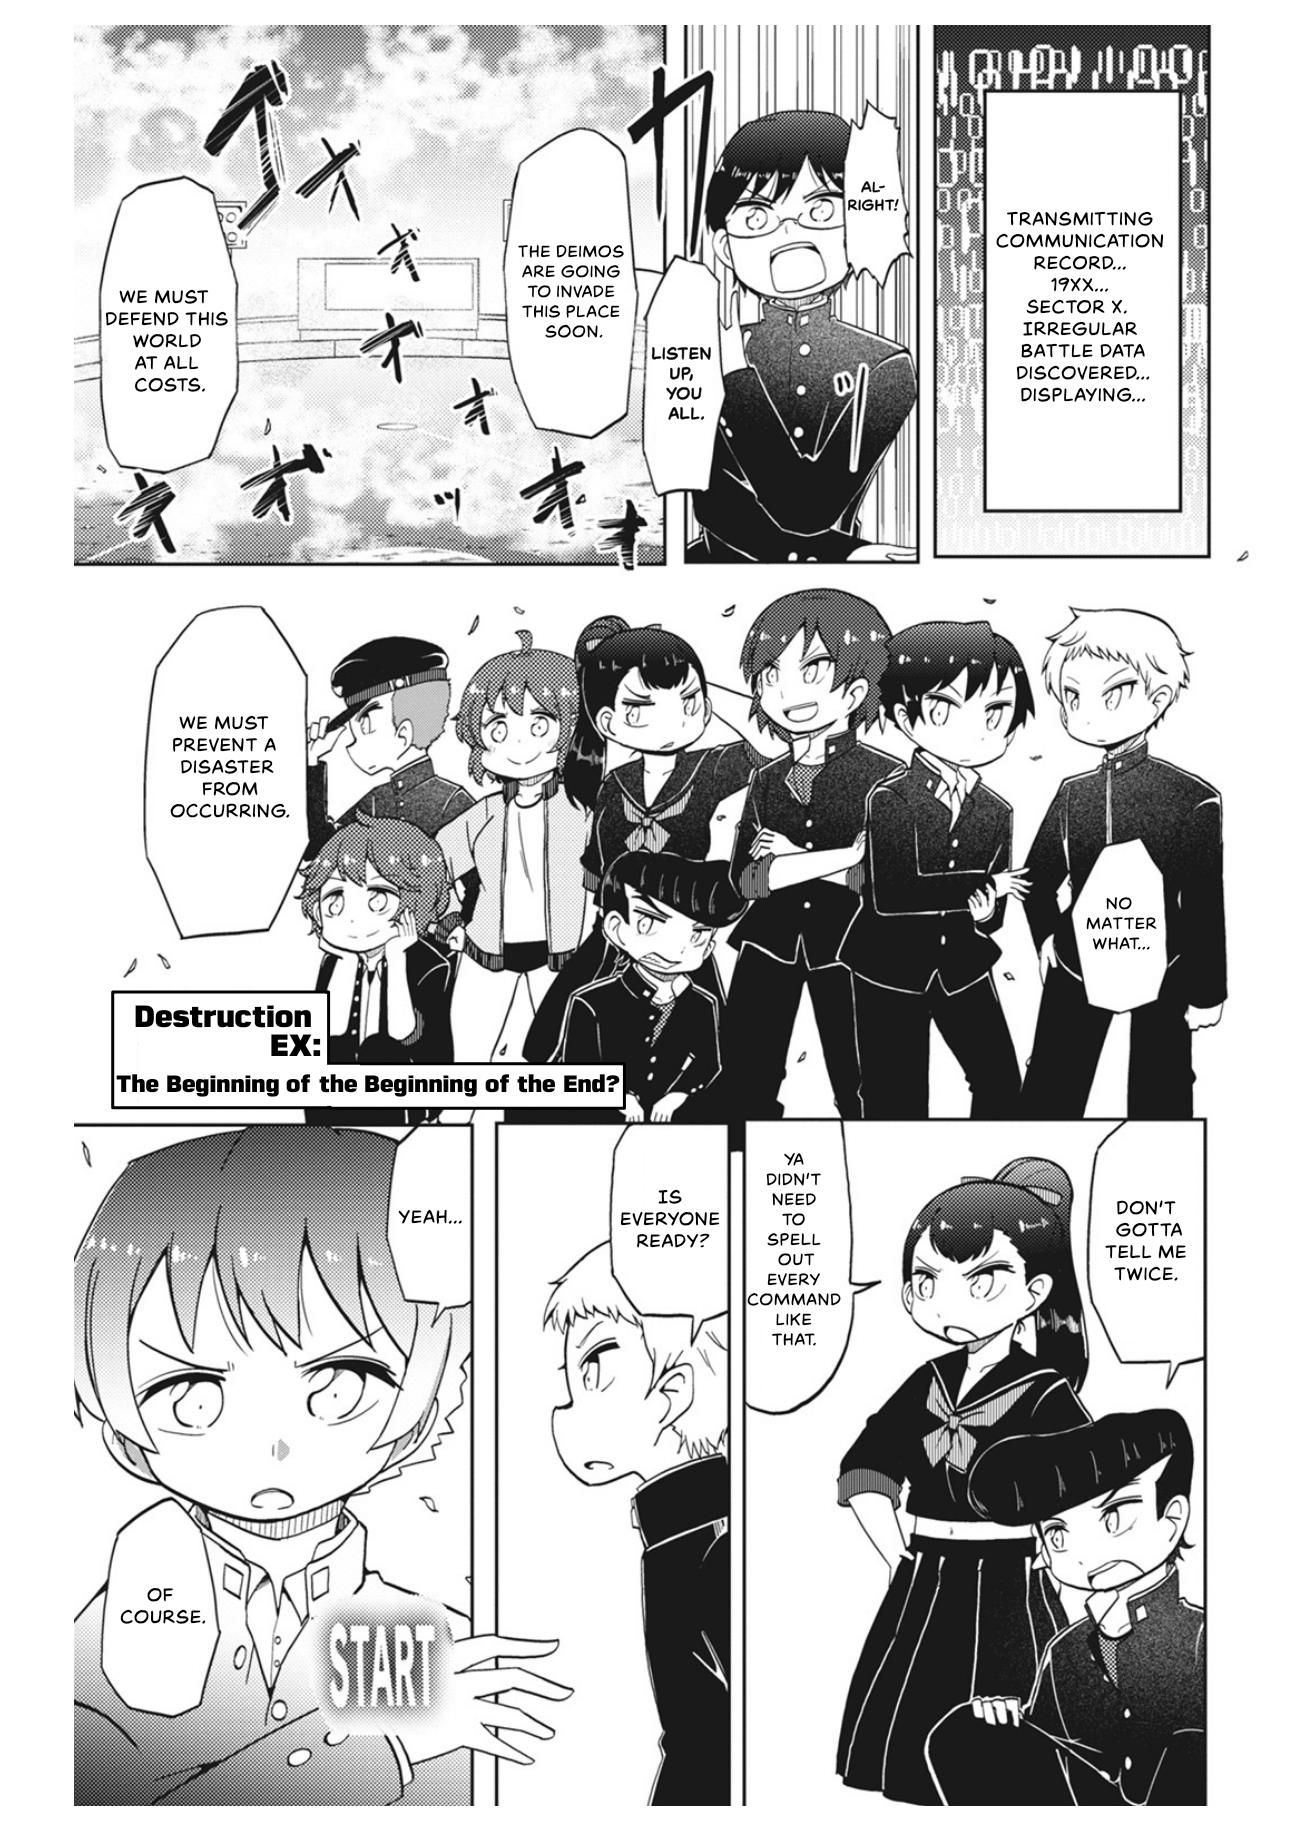 4-Panel 13 Sentinels: Aegis Rim This Is Sector X - chapter 10.5 - #1